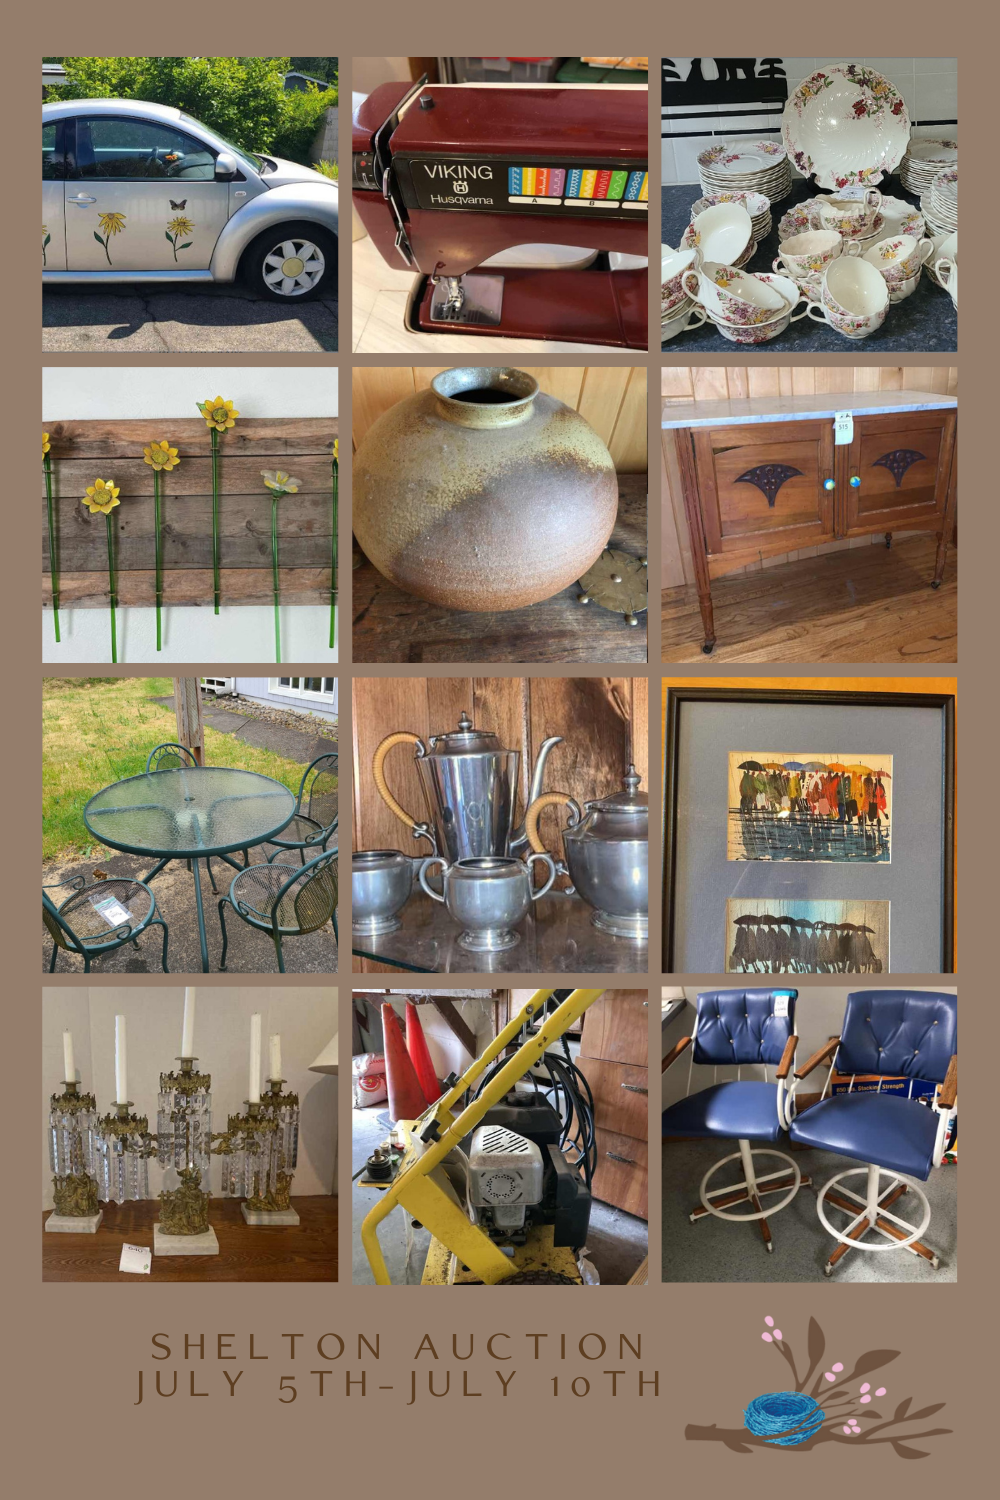 collage of images of items for sale at online estate sale auction in Shelton Washington July 5-10